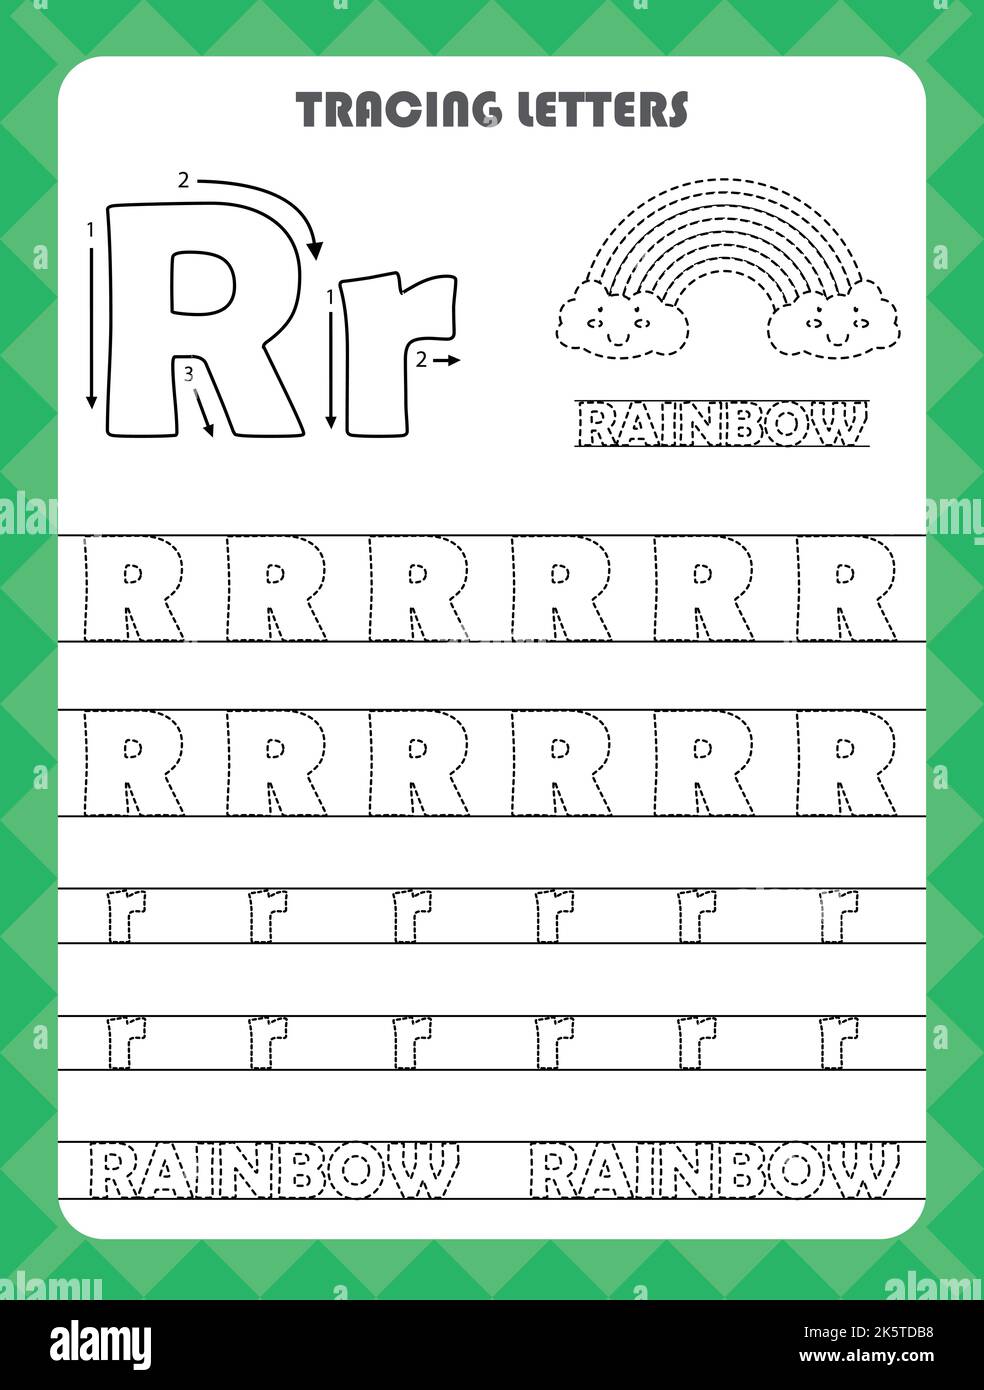 Trace letters of English alphabet and fill colors Uppercase and lowercase R. Handwriting practice for preschool kids worksheet. Stock Vector